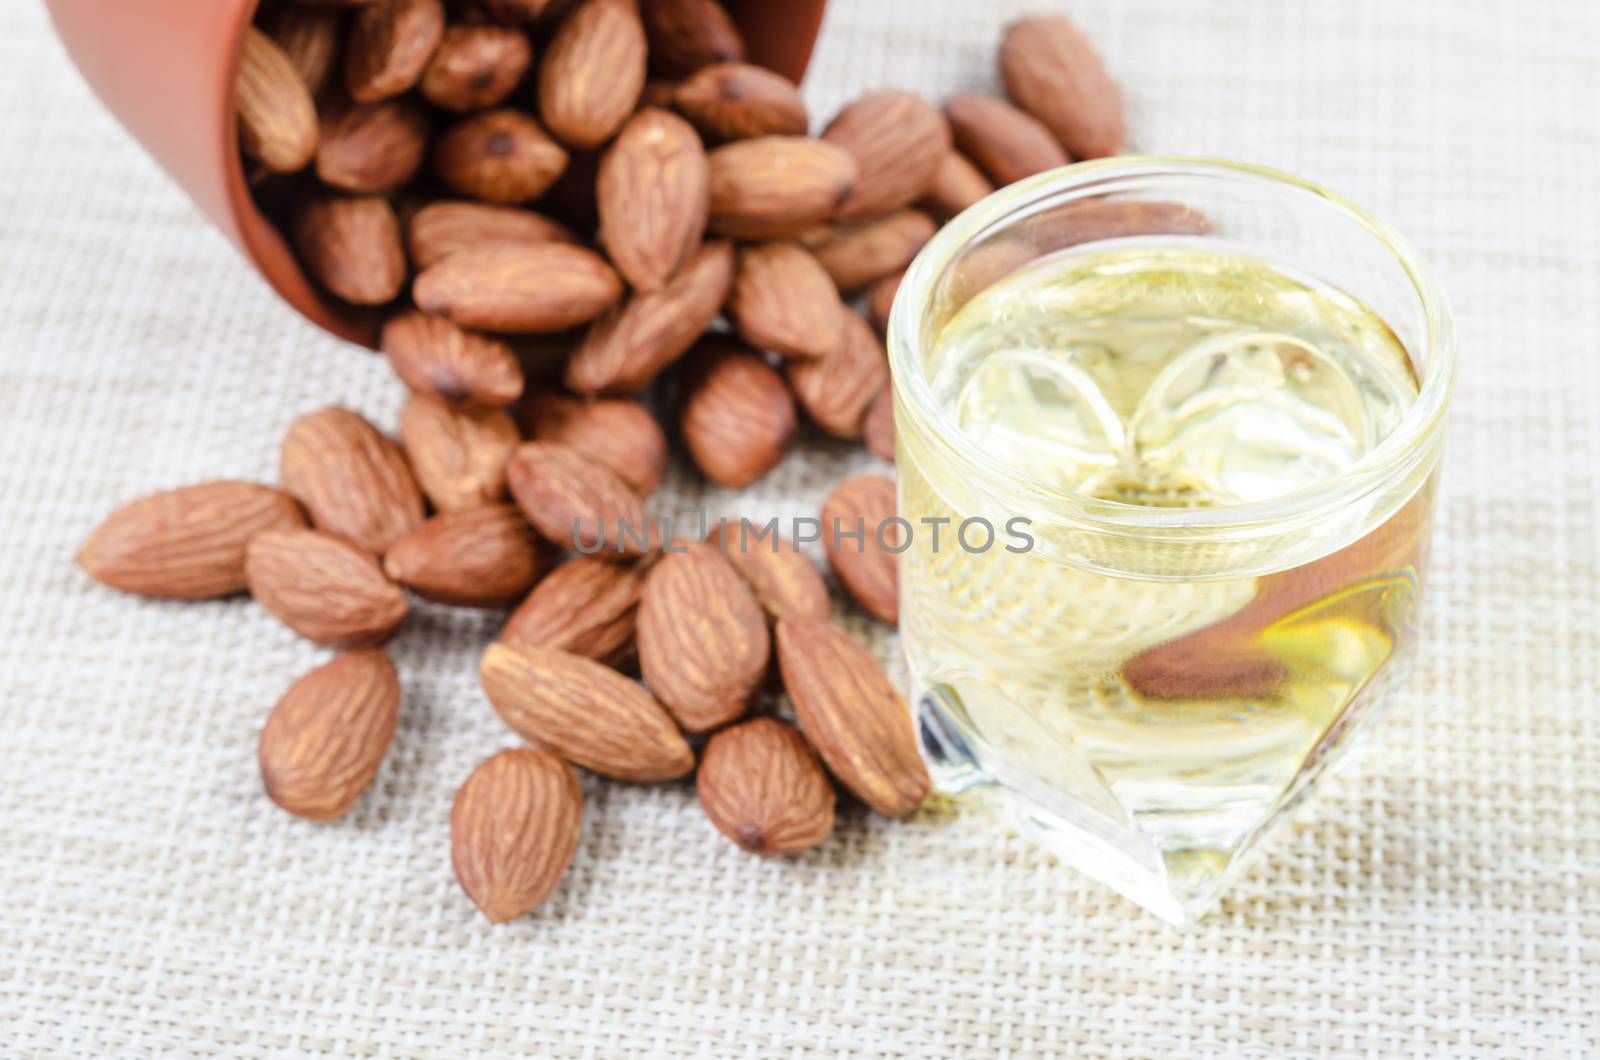 Almond oil with almond seed. by Gamjai